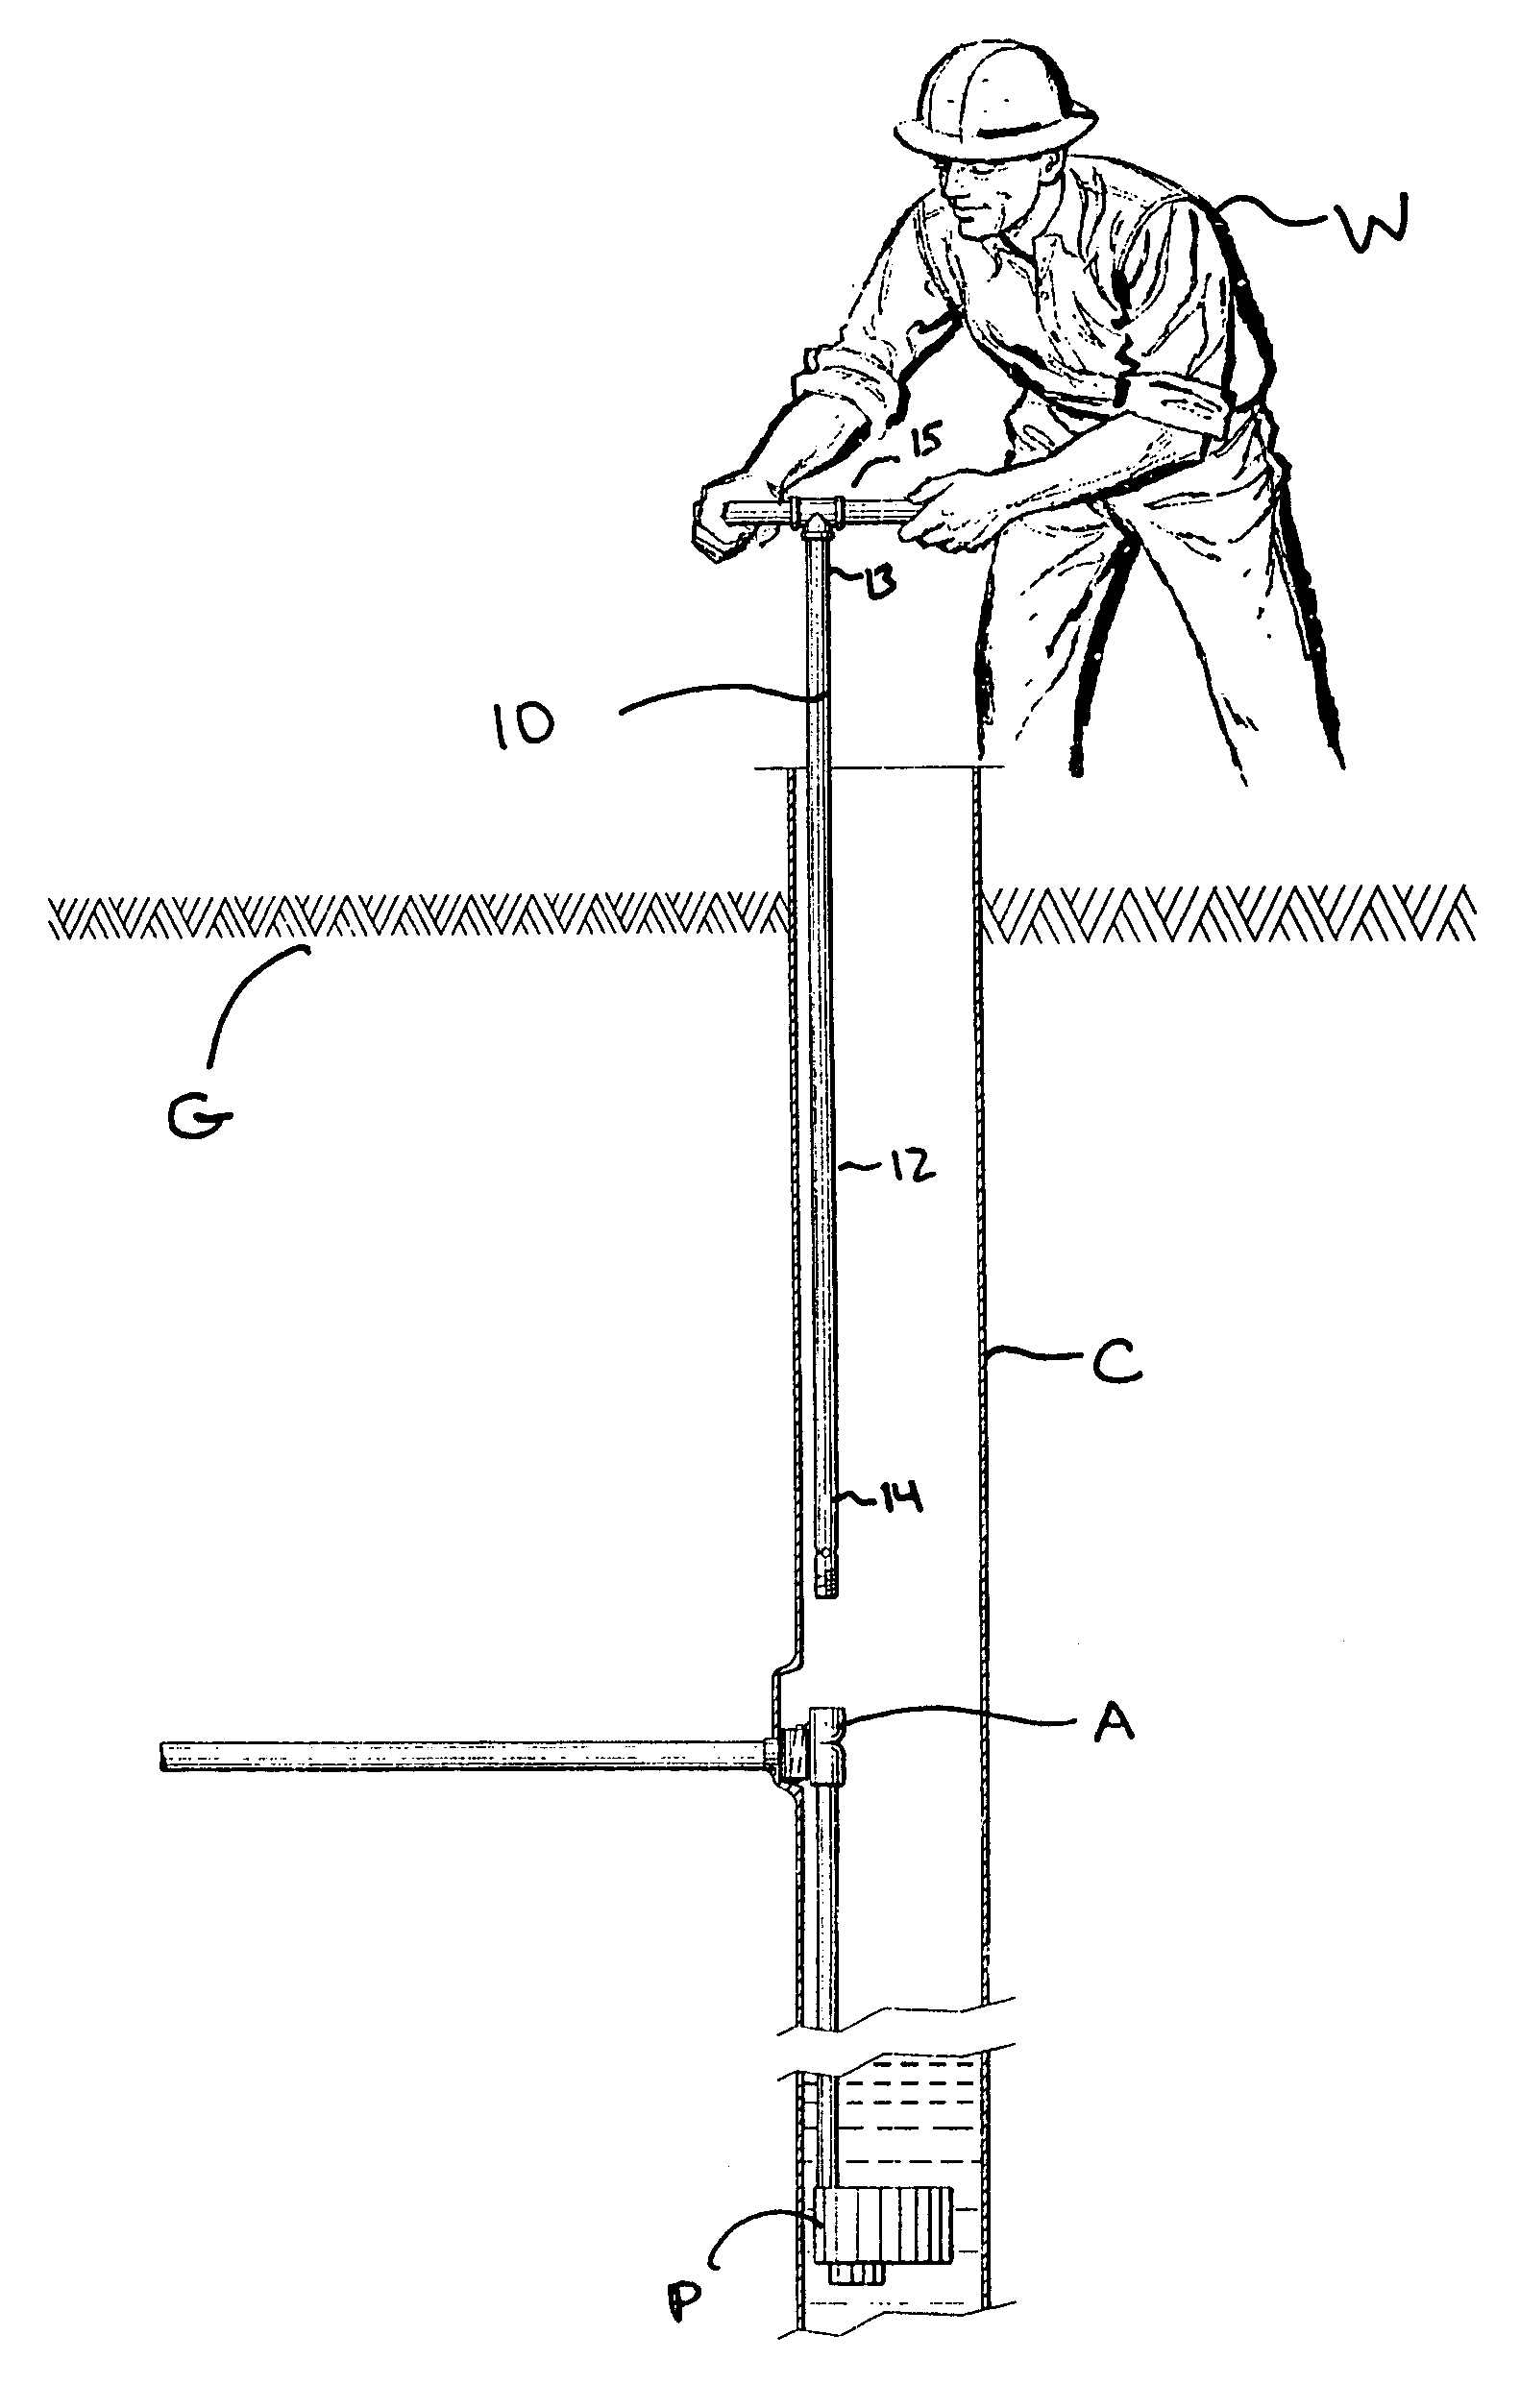 Lift-out device for pitless well adapters